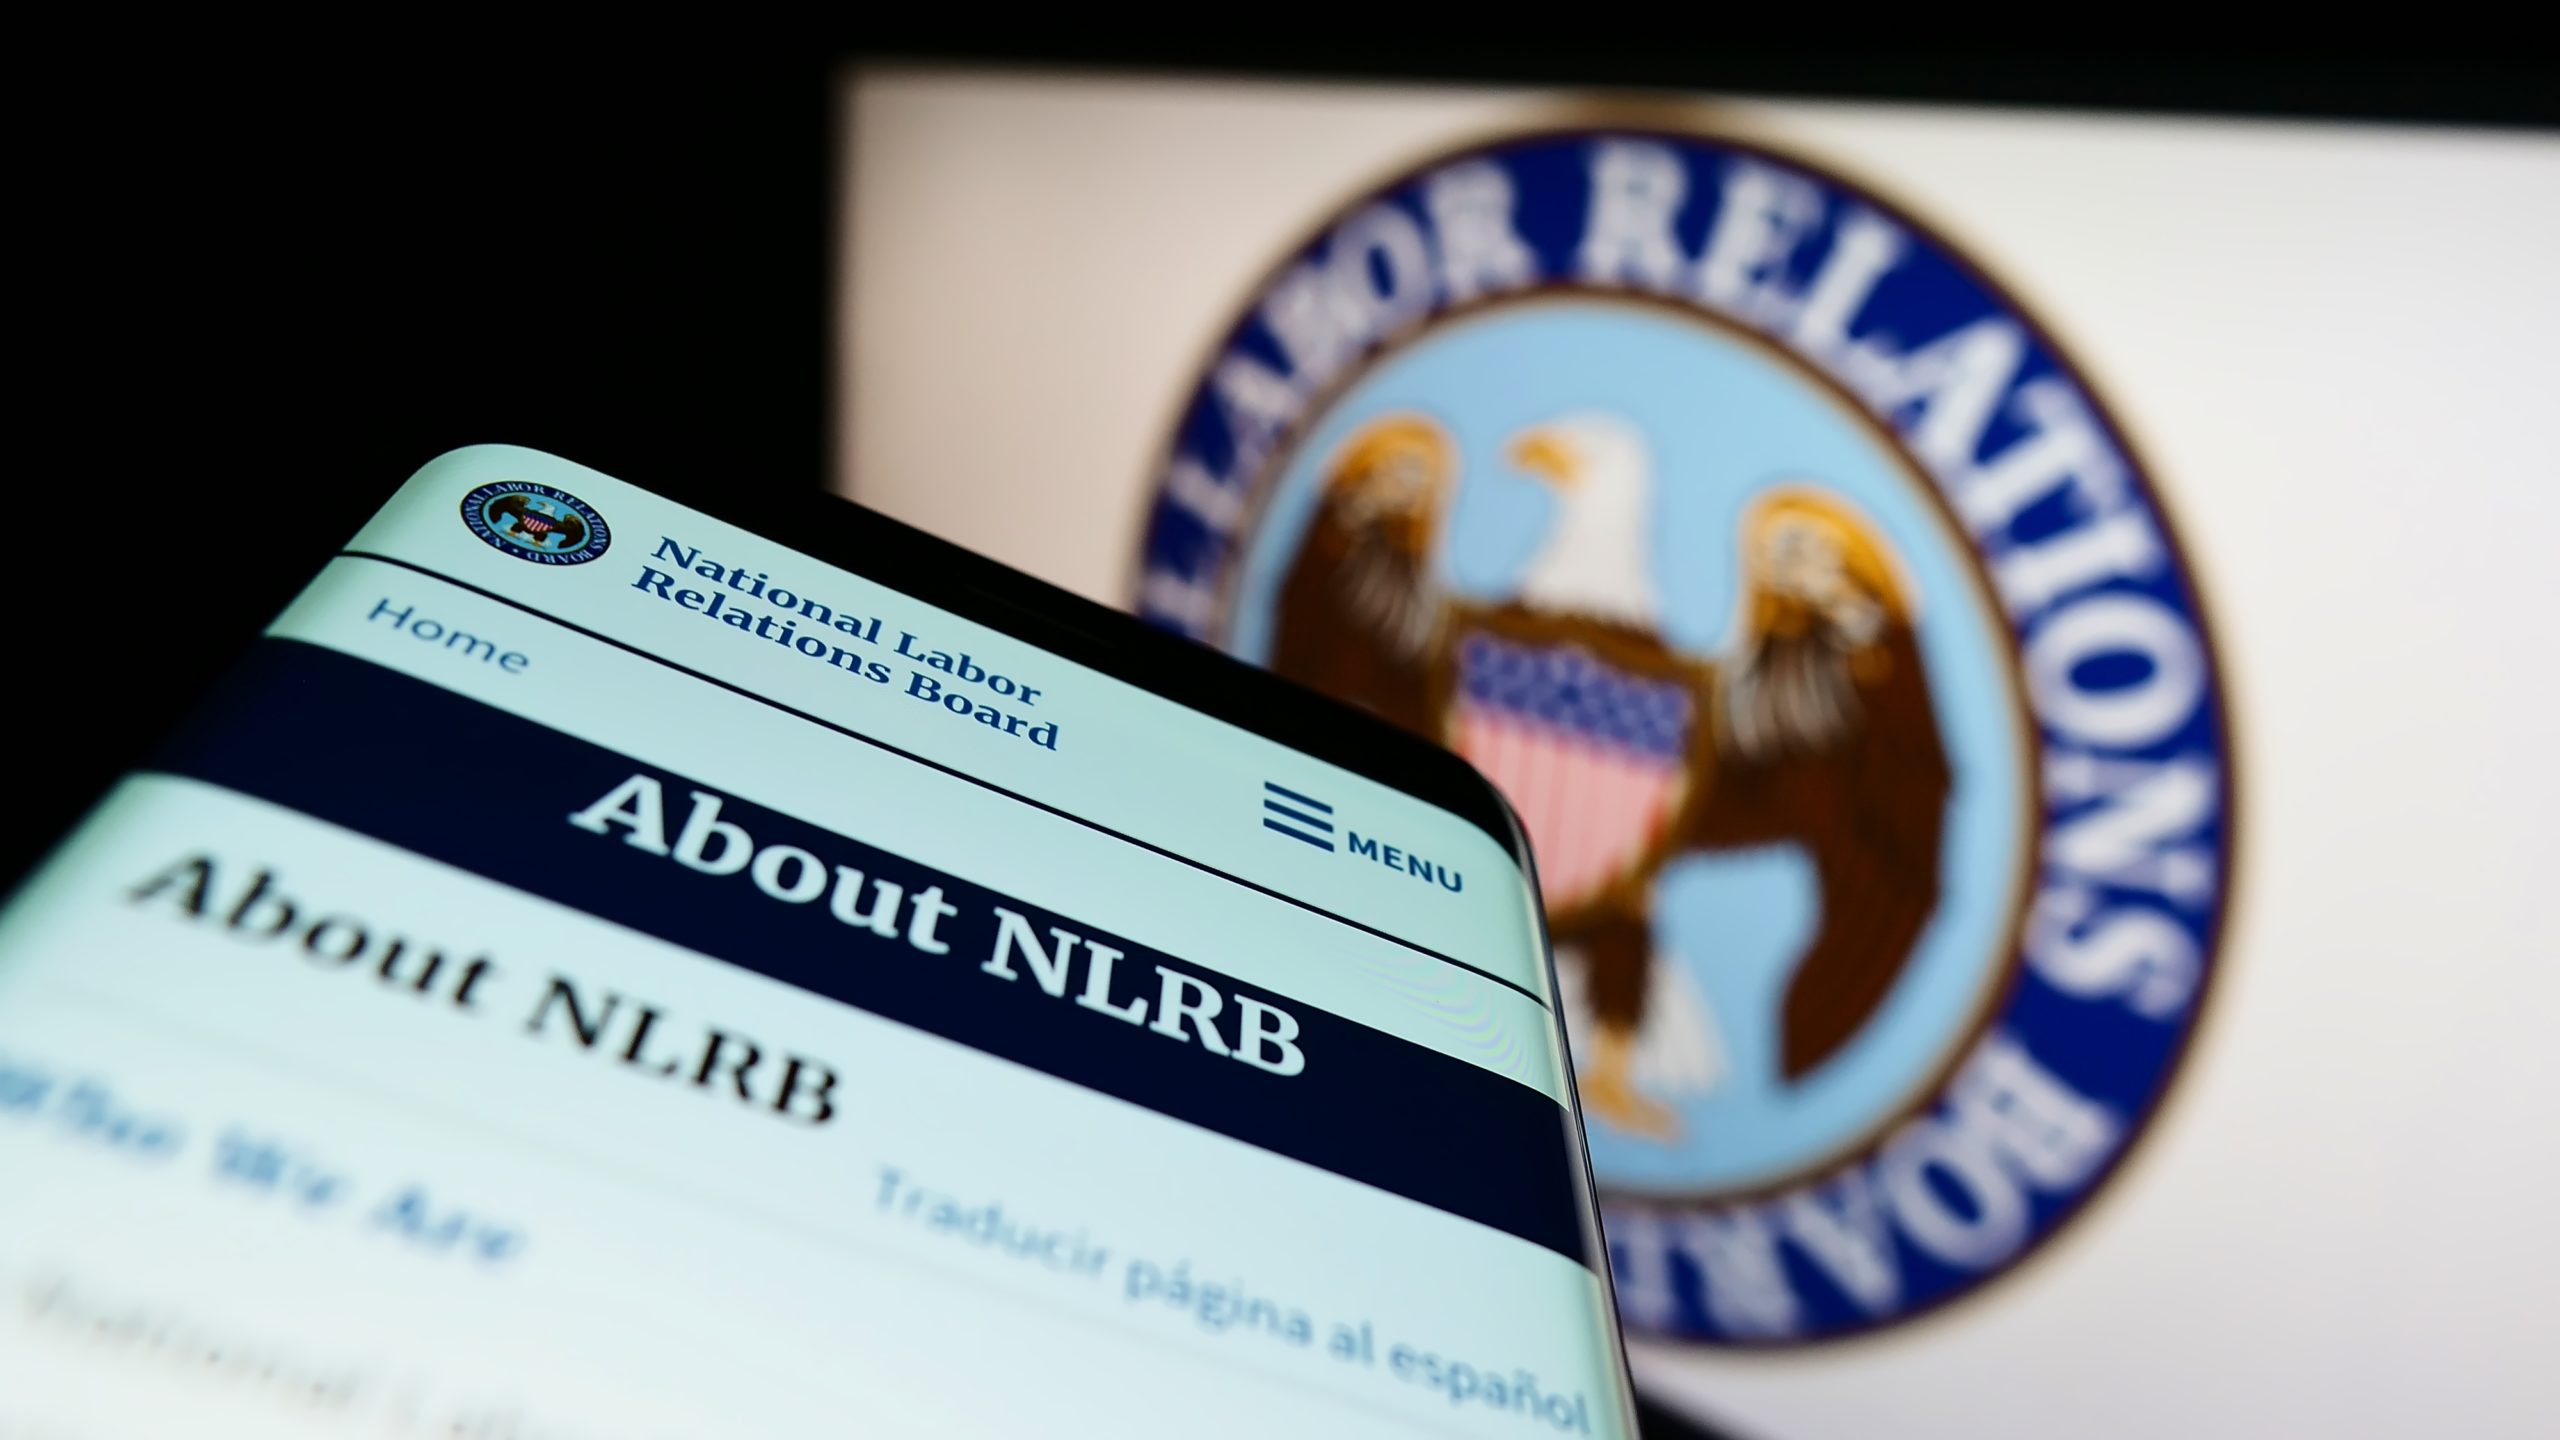 NLRB move could squash workplace democracy